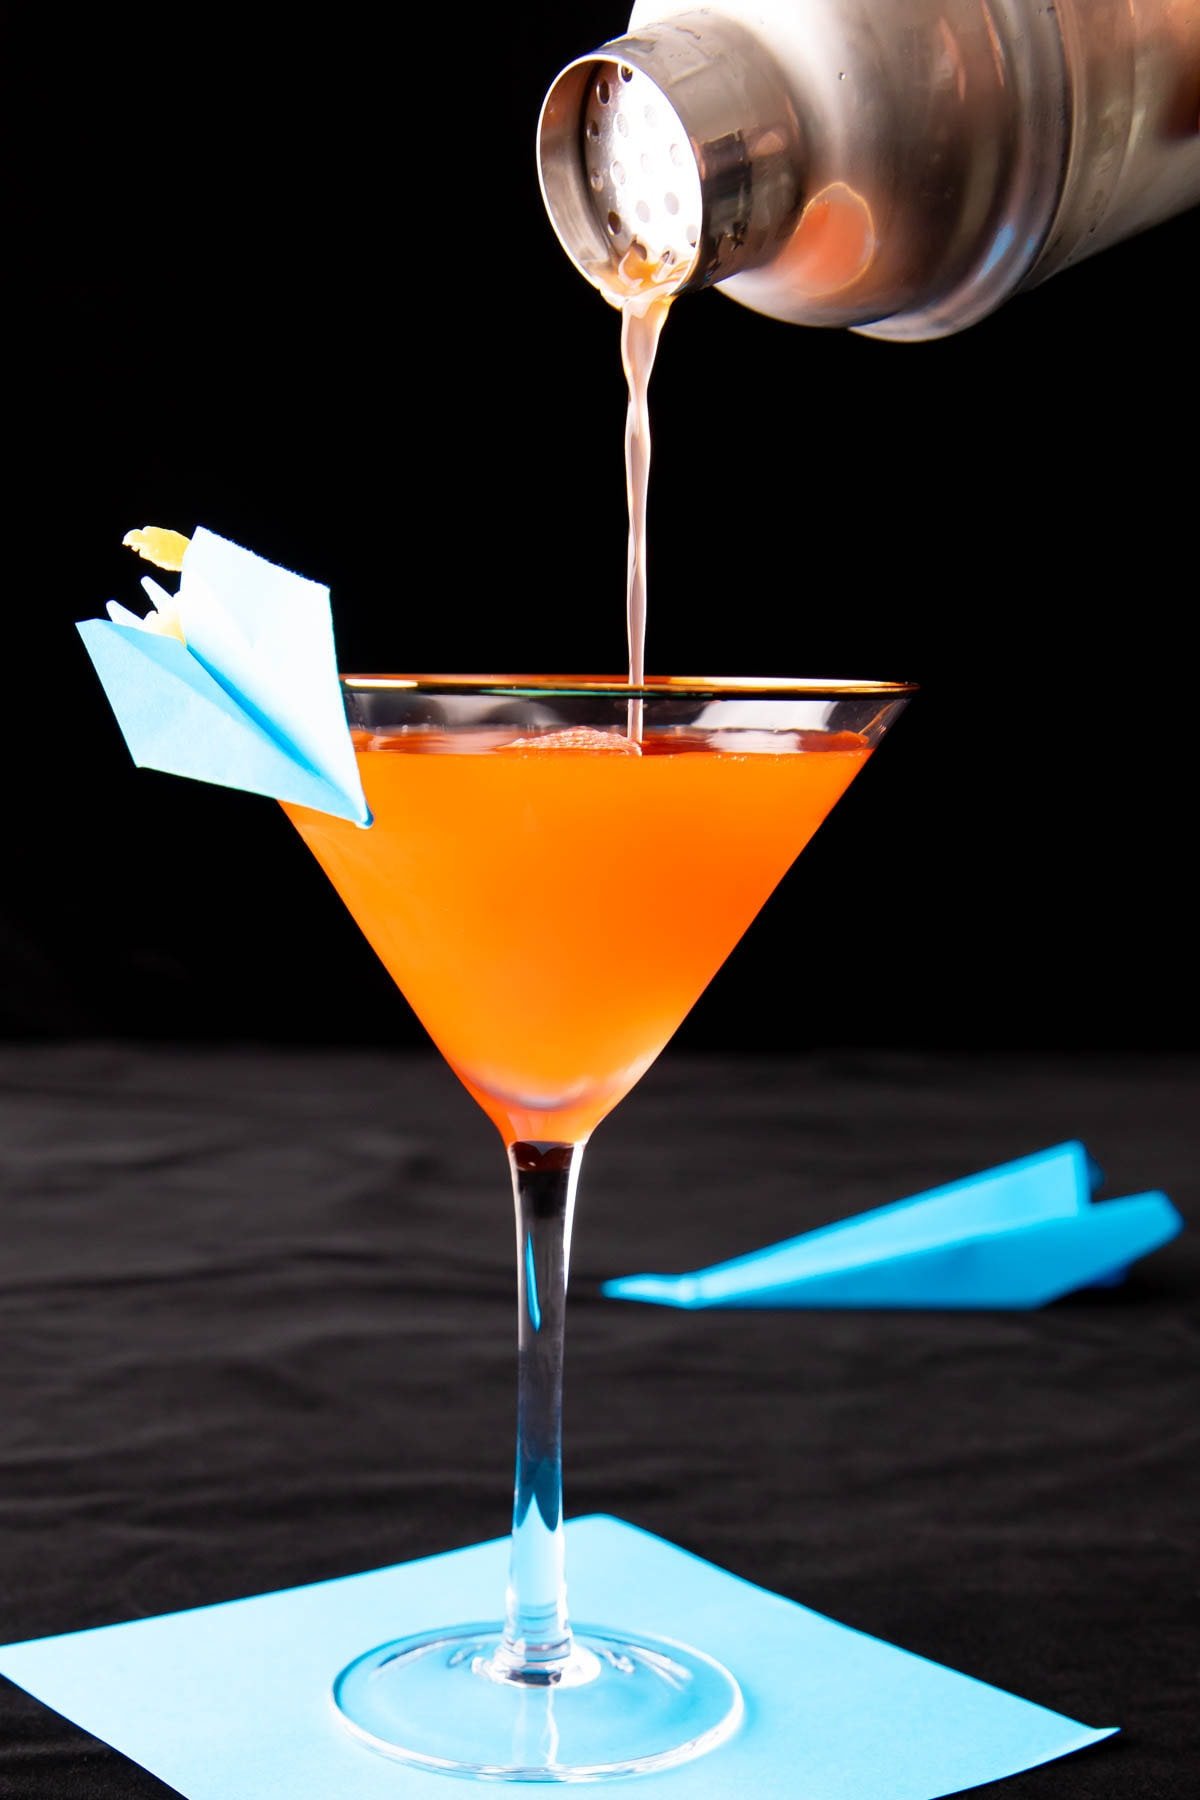 A photo showing How to Make a Paper Plane Cocktail – pouring the last drop of drink mixture into a glass with a paper plane garnish